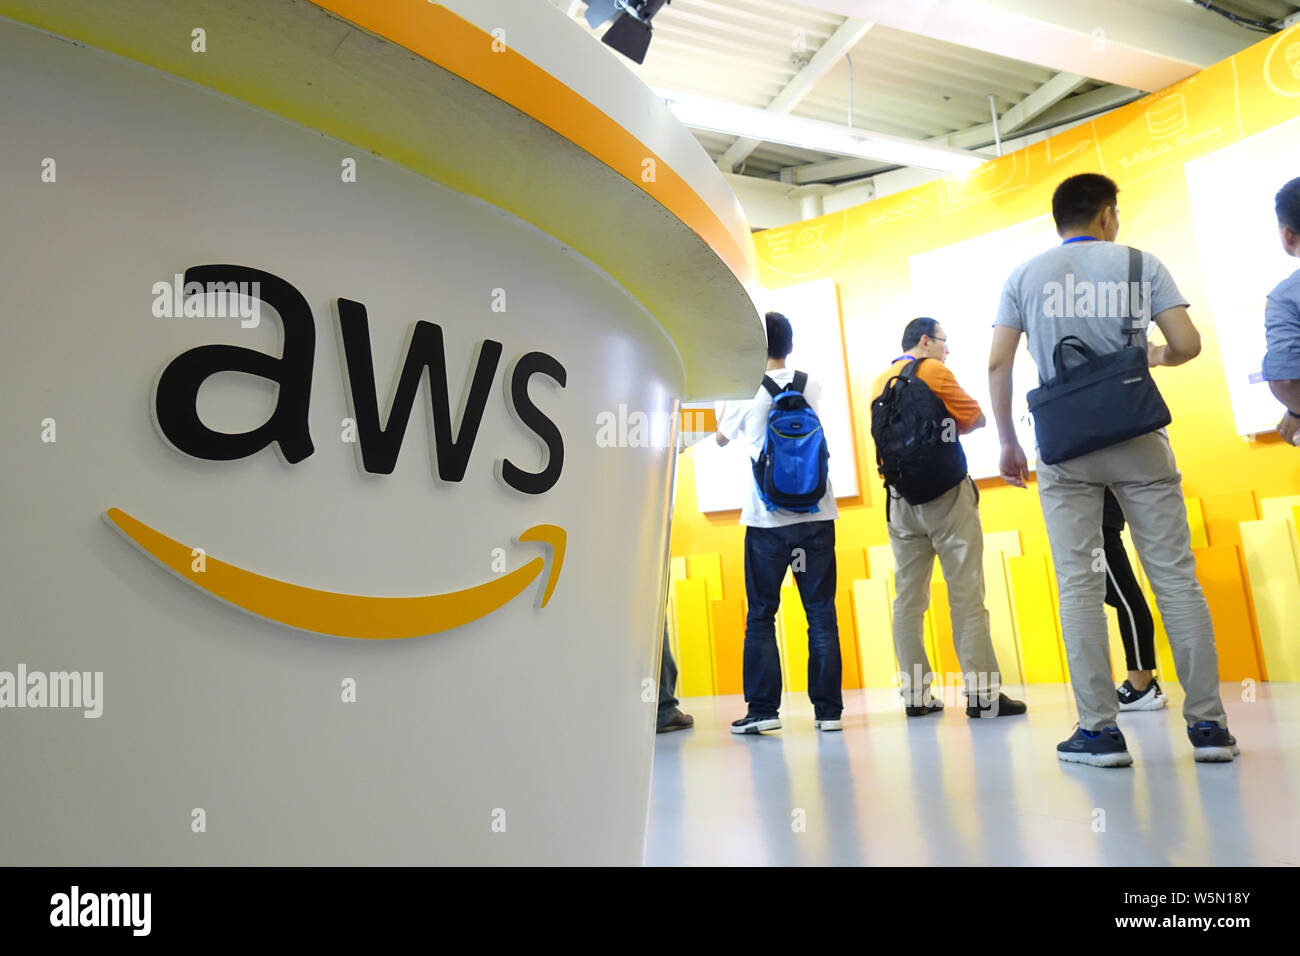 Amazon Web Services High Resolution Stock Photography and Images - Alamy